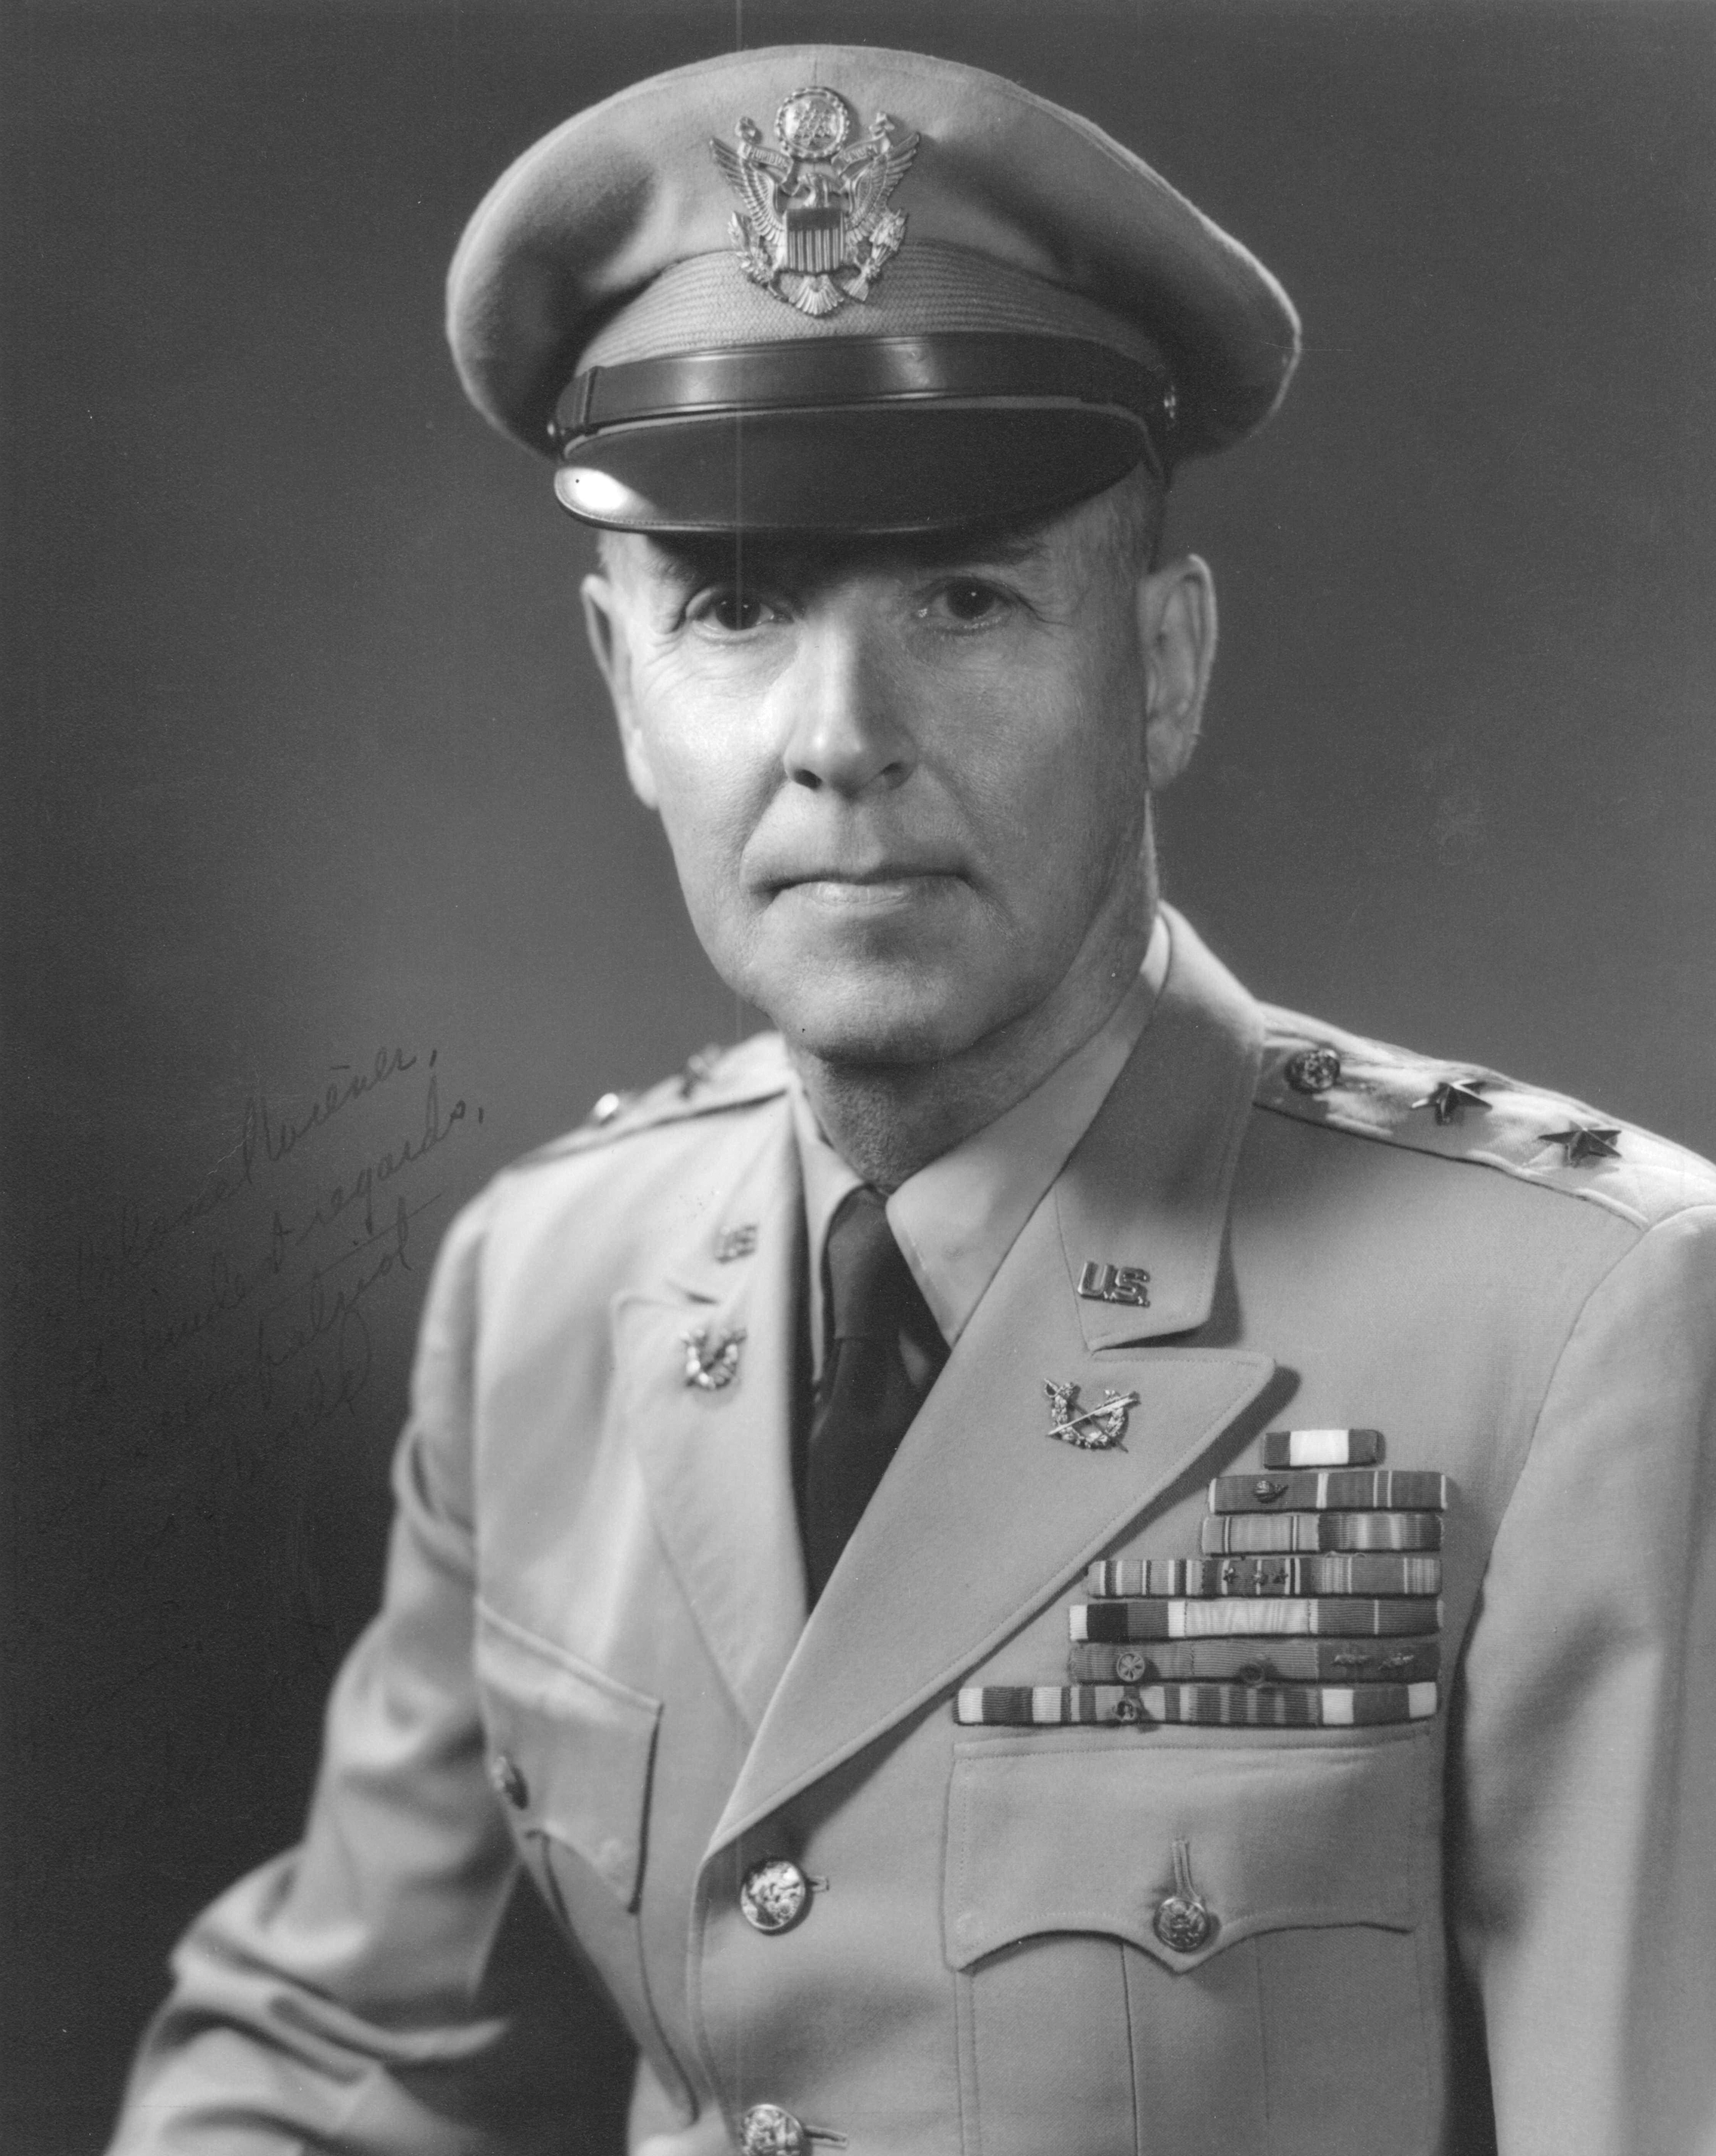 Major General Claude B. Mickelwait, TAJAG, 1954-
            1956. (Photo courtesy of Fred L. Borch III)